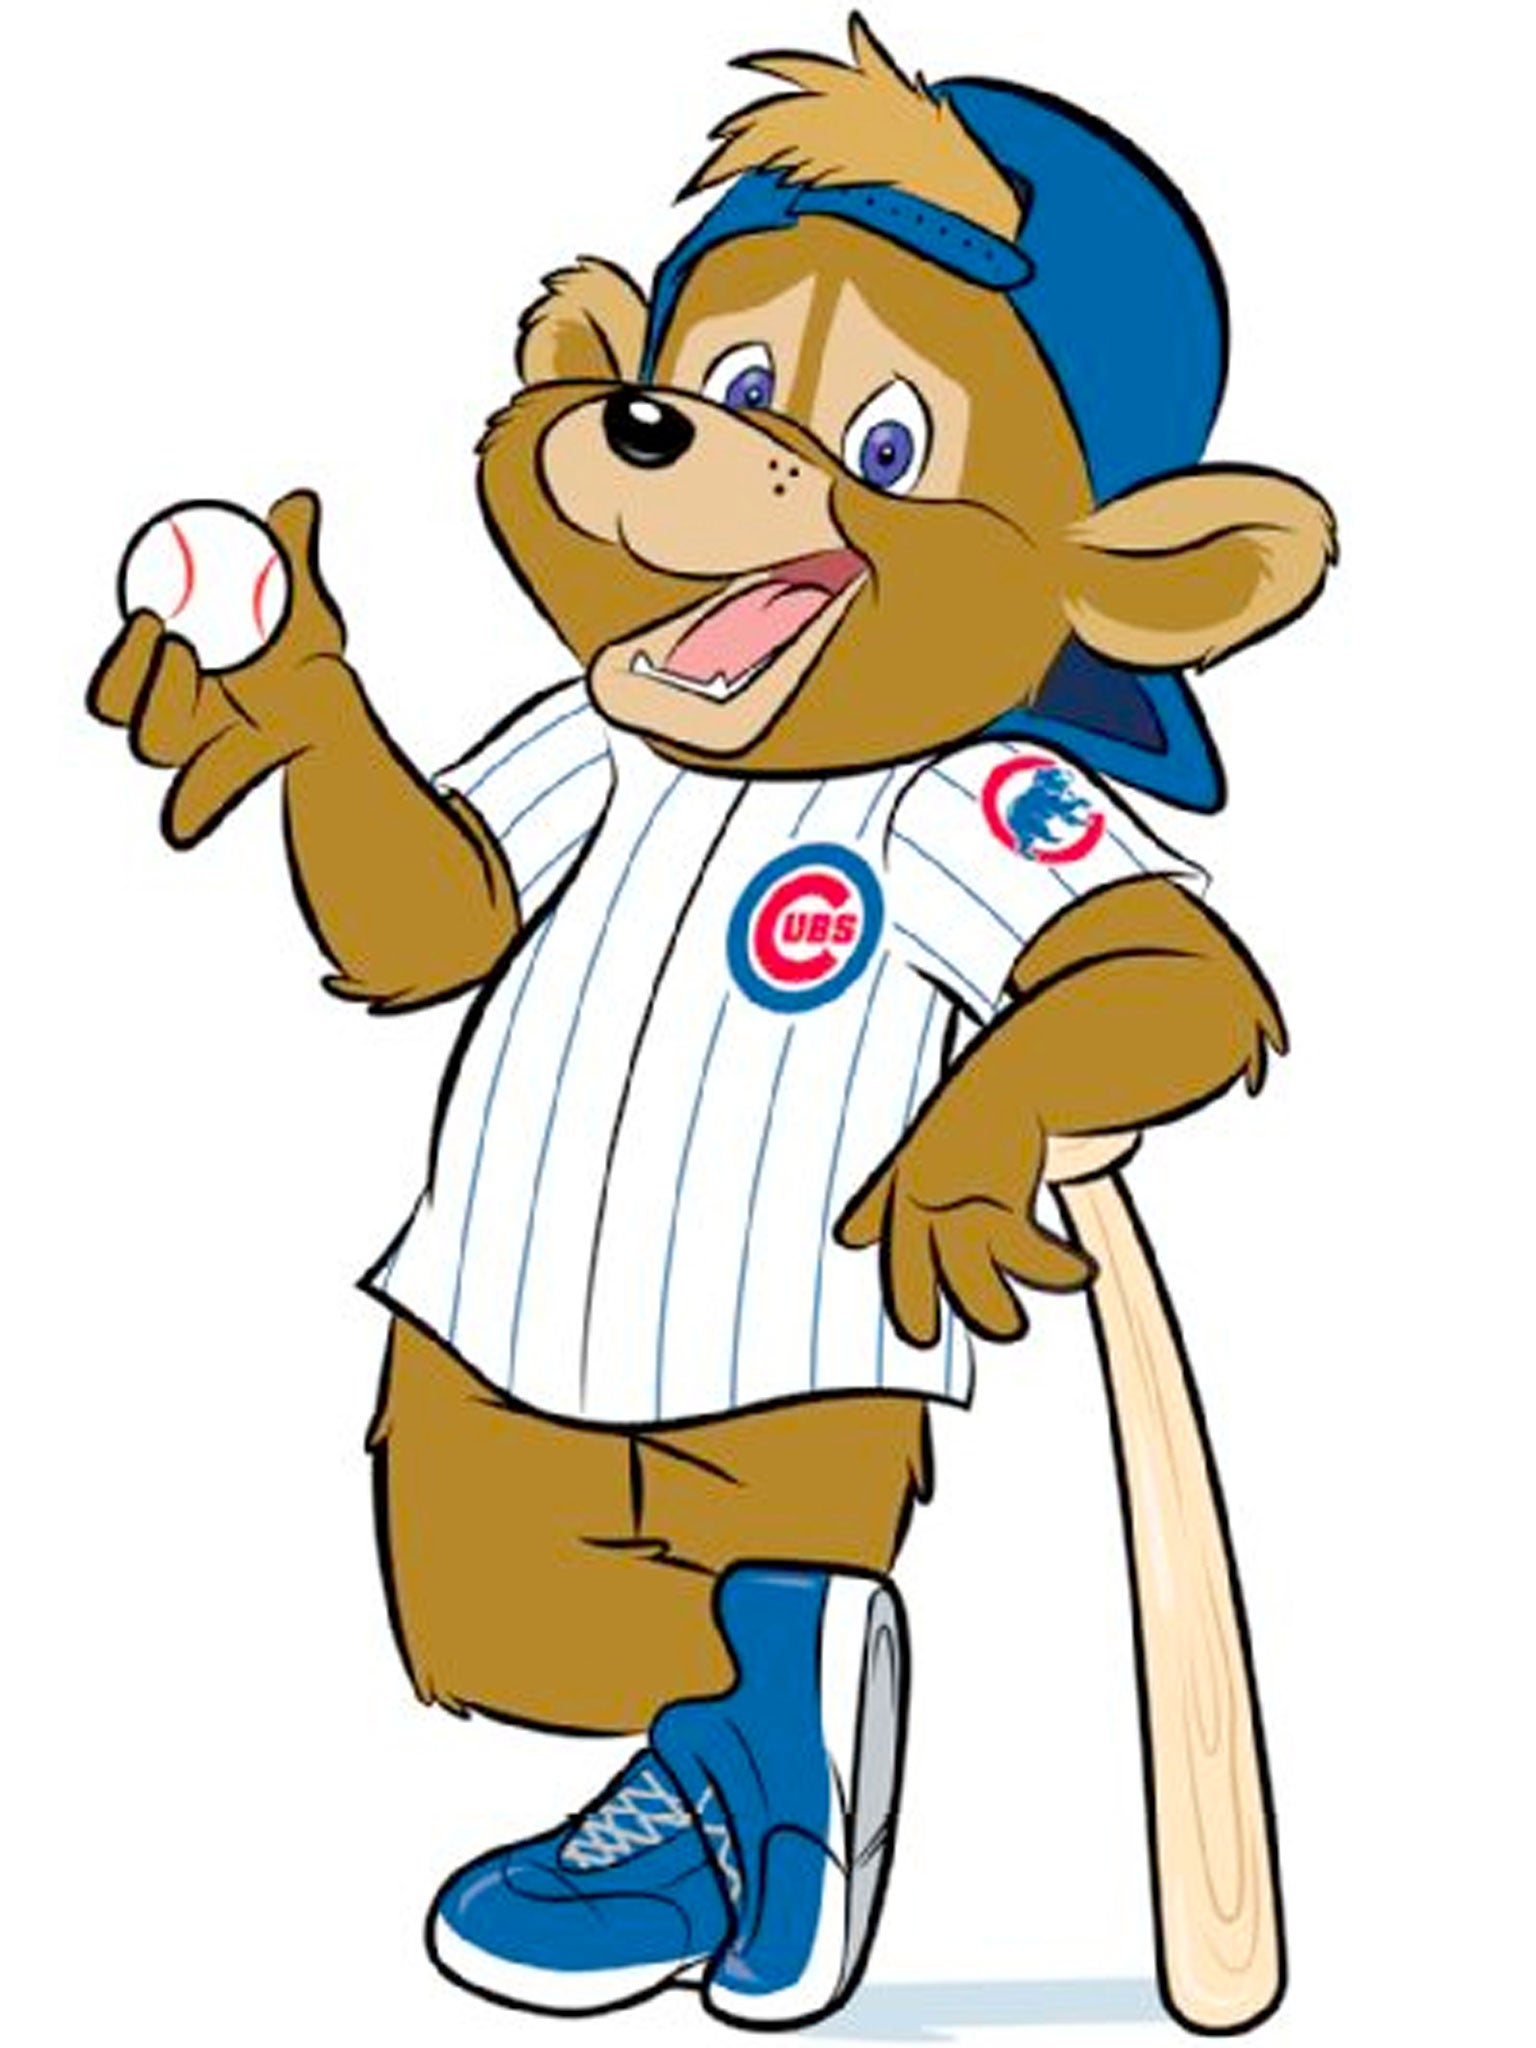 Clark the Cub 'pants-gate': US TV channel accidentally introduces Chicago  baseball team's new mascot using x-rated spoof image, The Independent